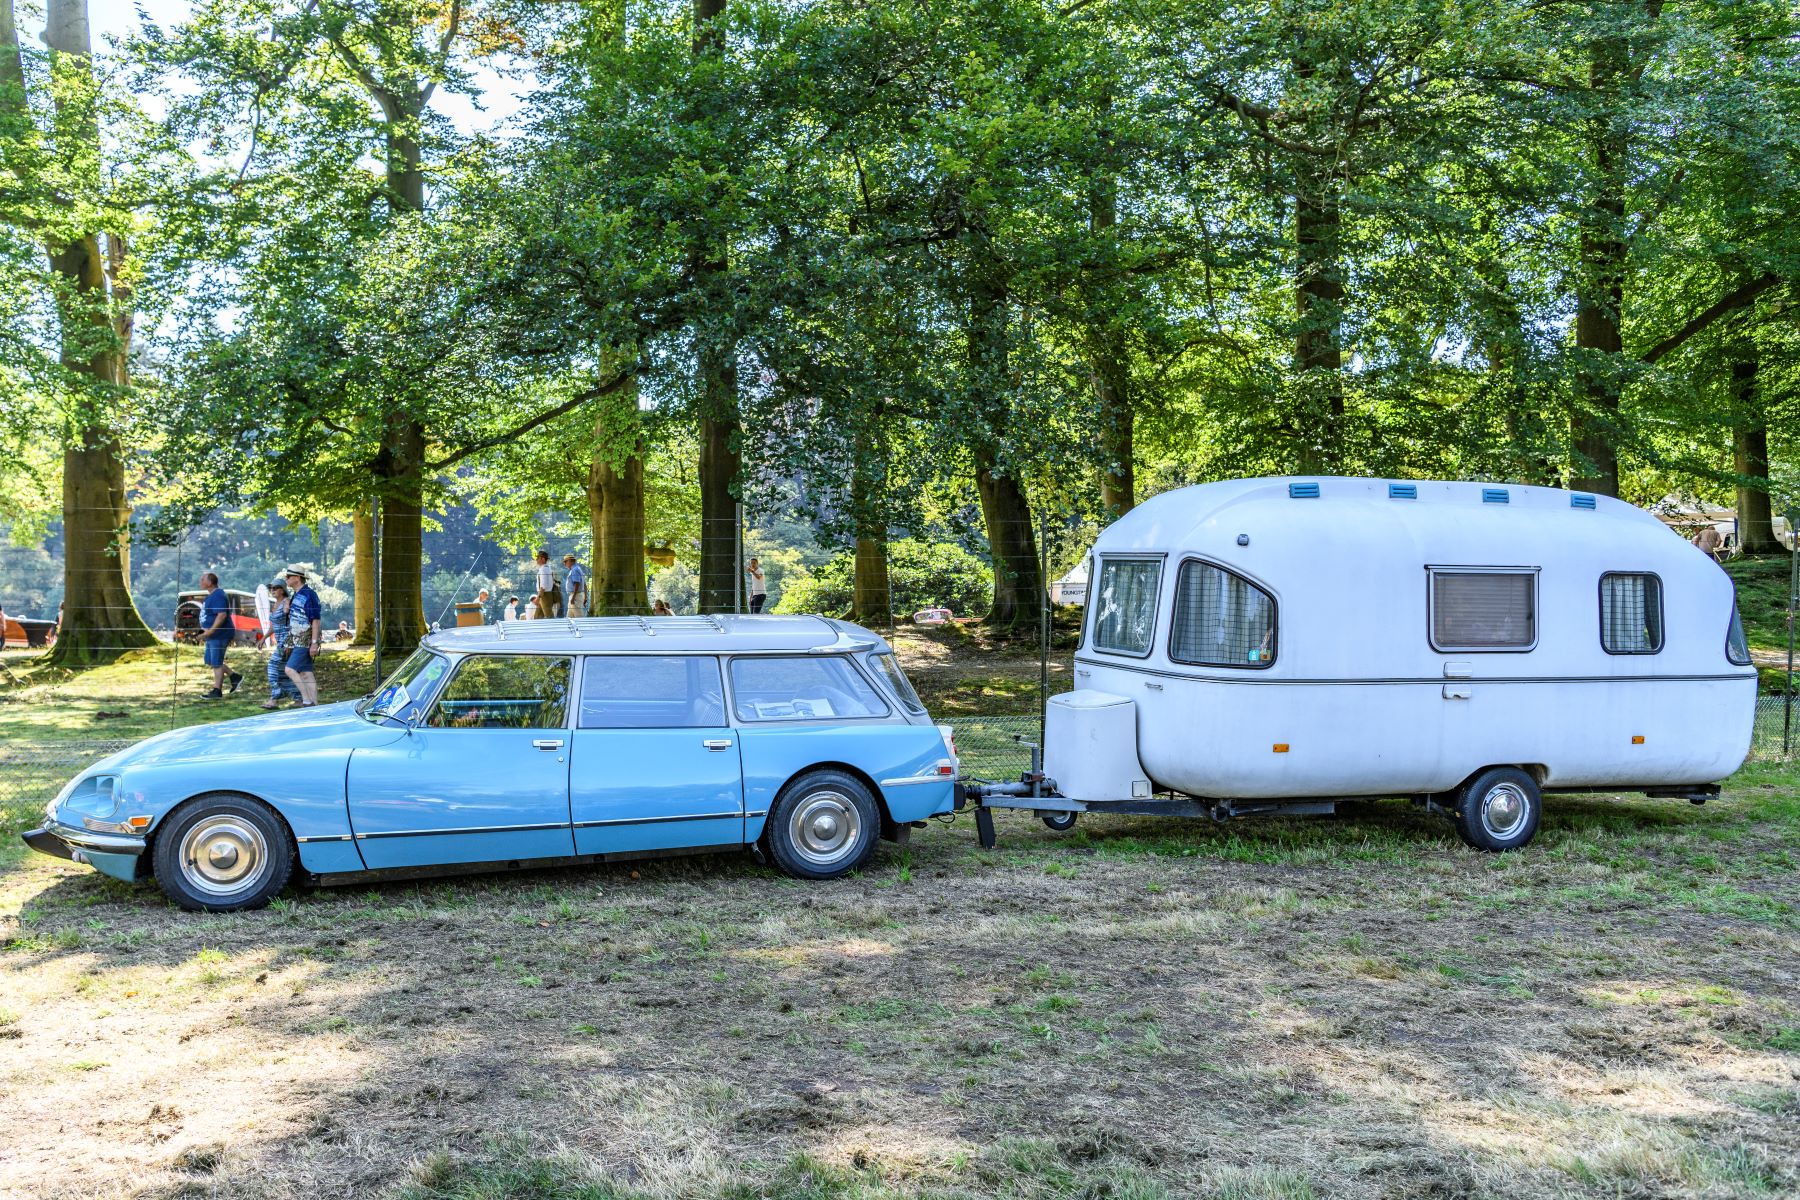 A Citreon DS station wagon with an attached travel trailer at the 2019 Concours d'Elegance in Baarn, Netherlands